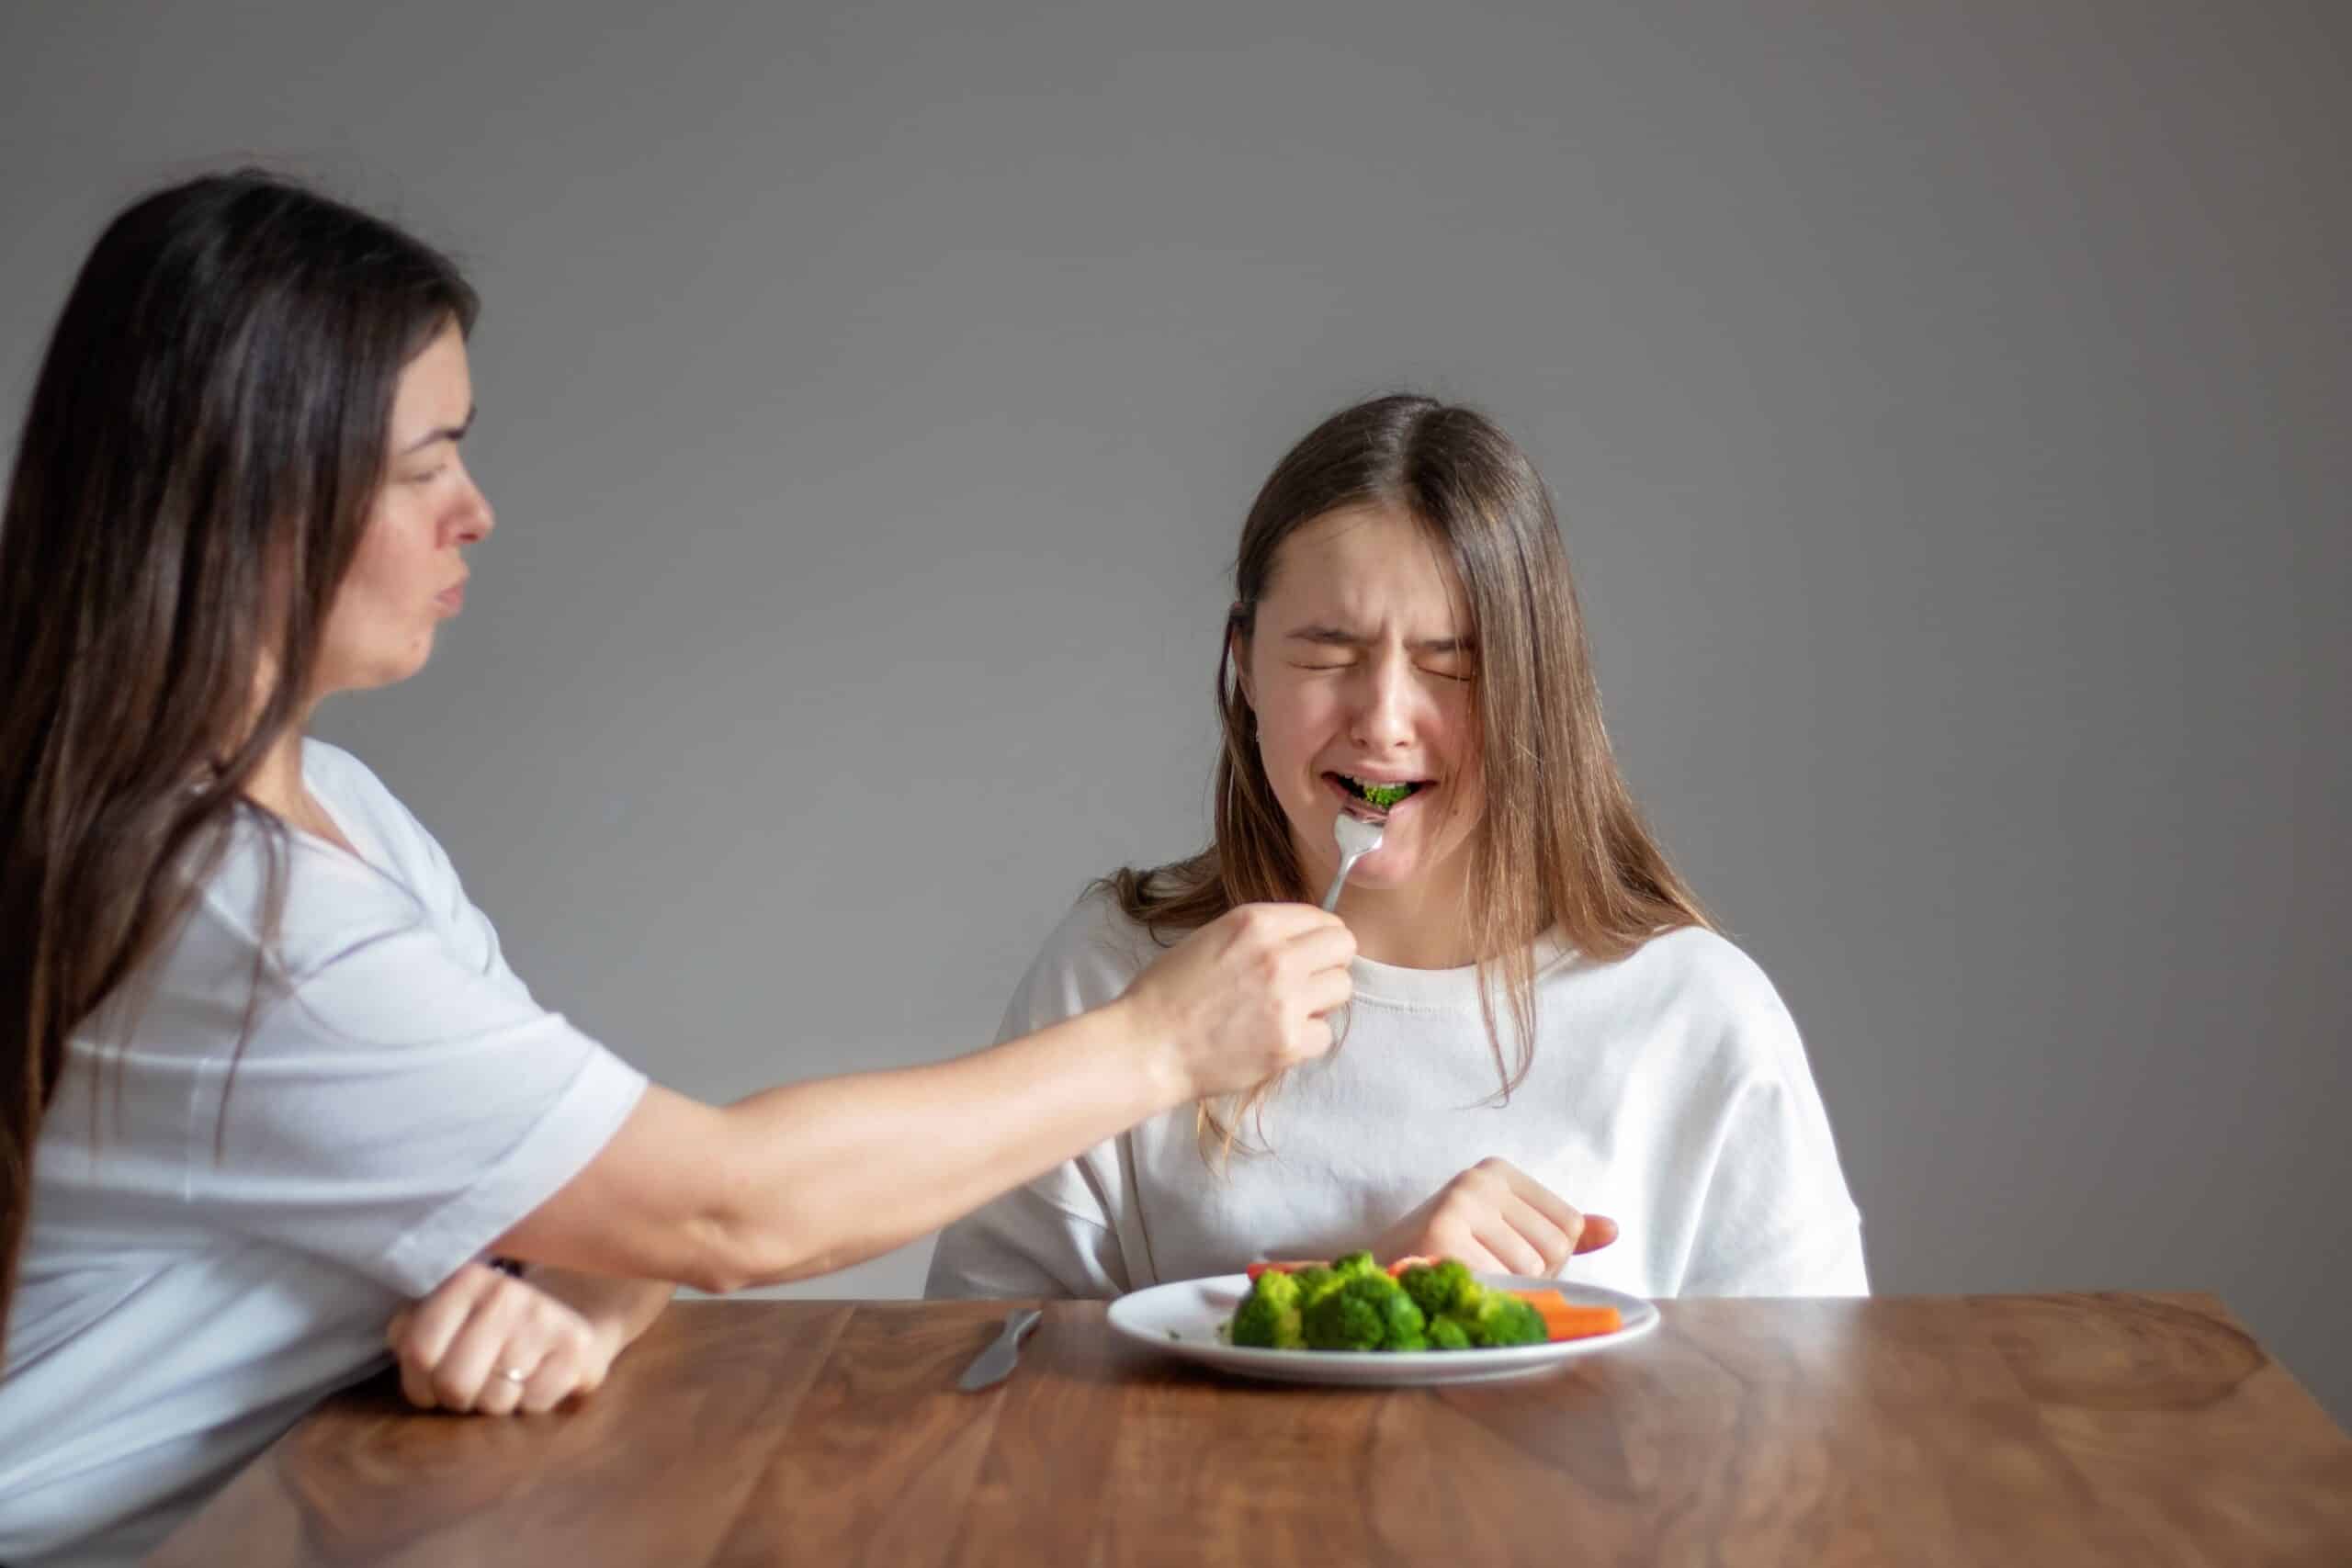 Mother forces her crying teen daughter to eat healthy food feeding her broccoli with fork. Food waste. No vegan diet concept. No choice